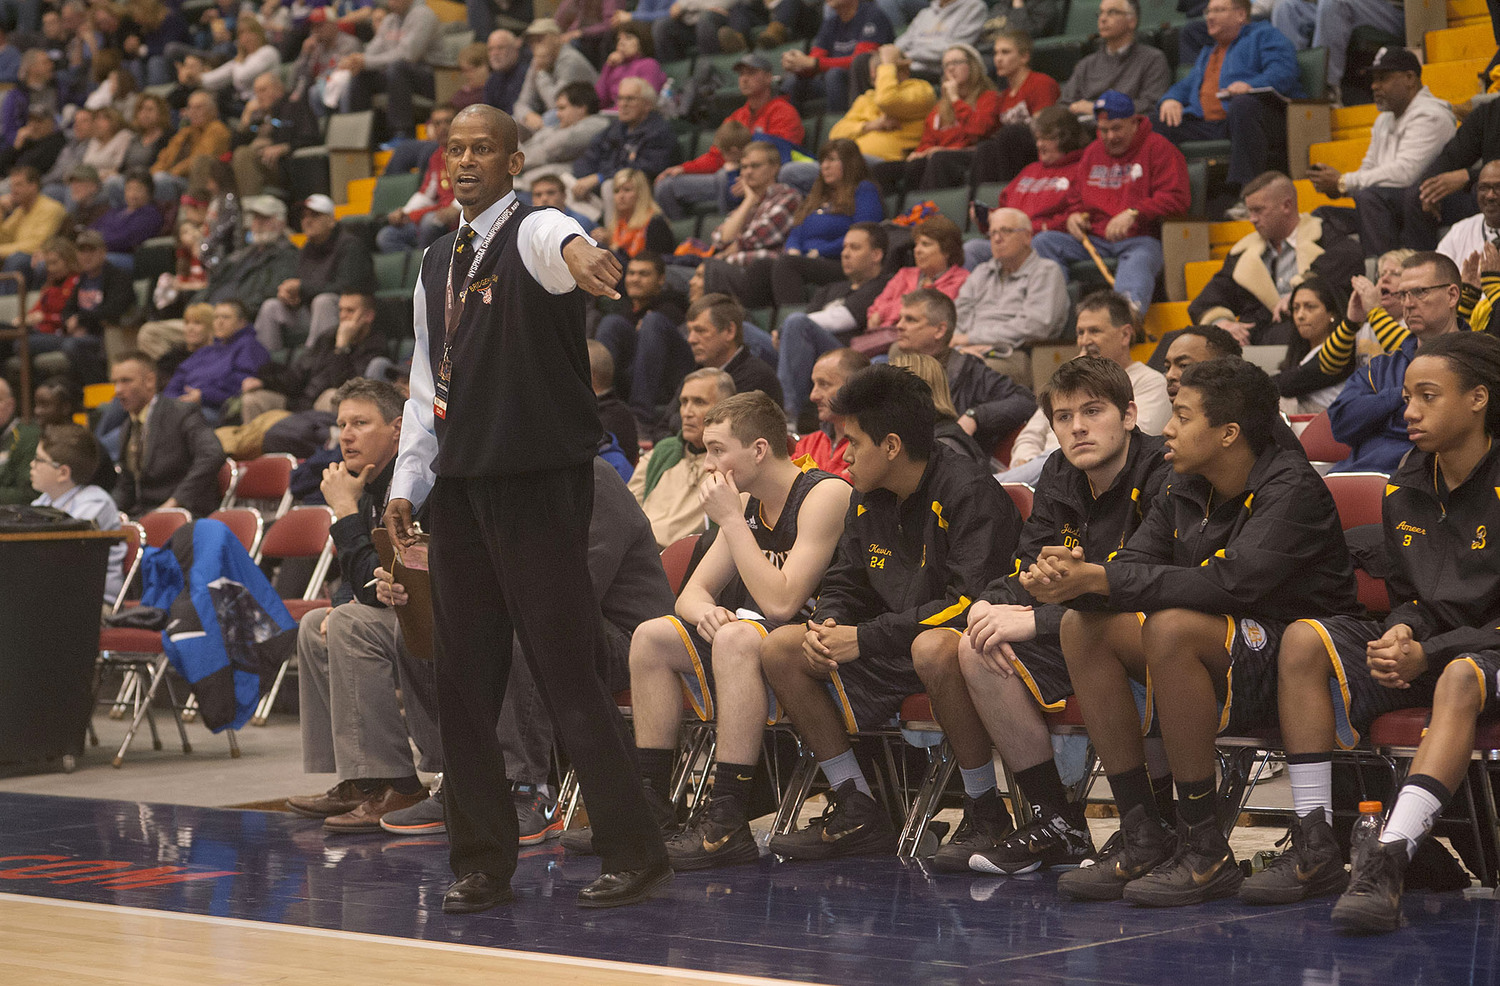 Carl Johnson coaching the Killer Bees during the New York State Class D semifinal.    MICHAEL HELLER